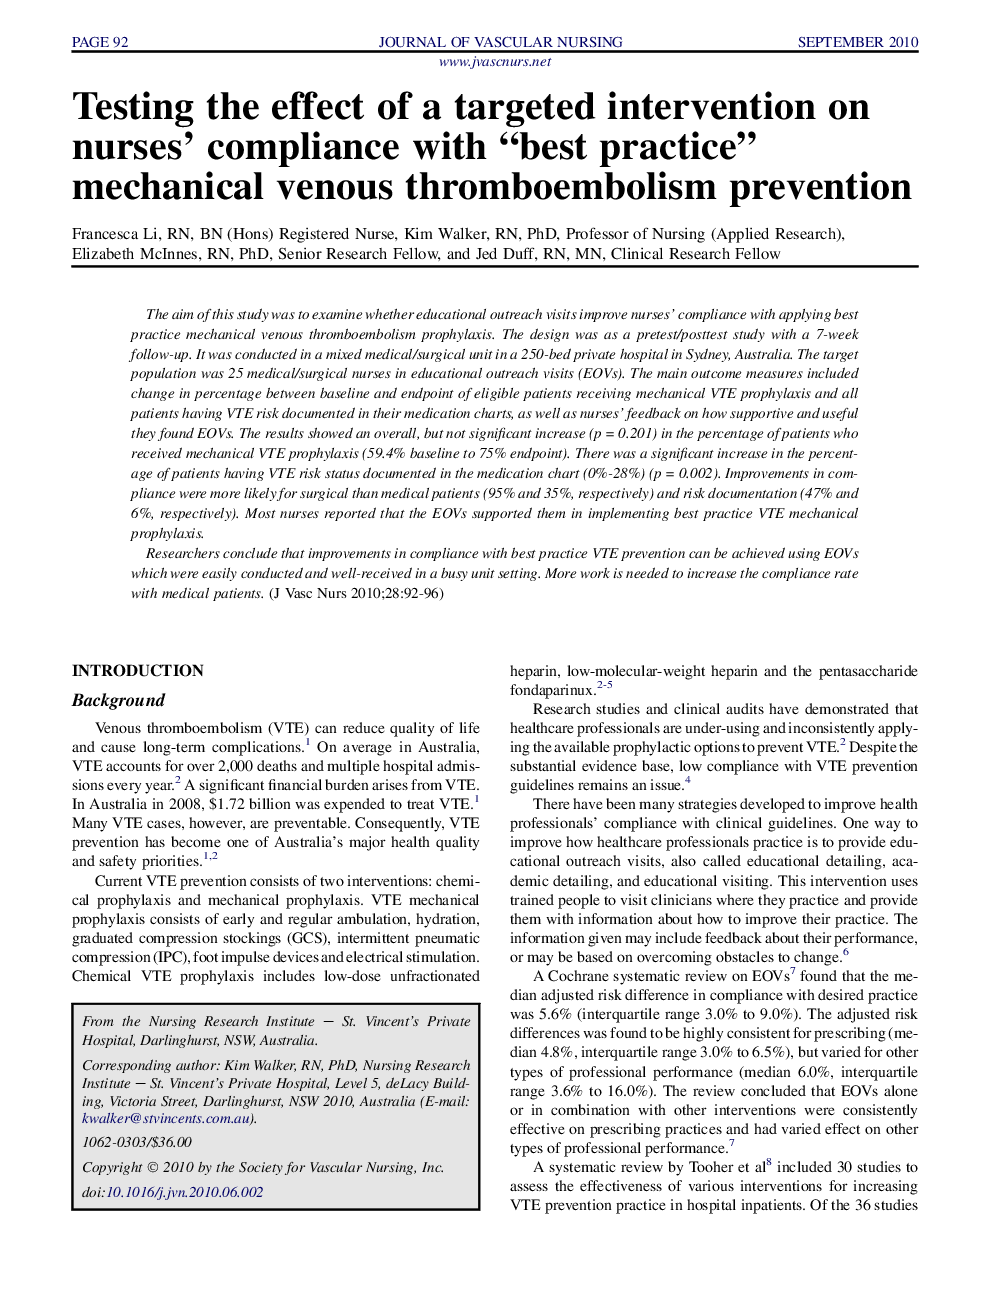 Testing the effect of a targeted intervention on nurses’ compliance with “best practice” mechanical venous thromboembolism prevention